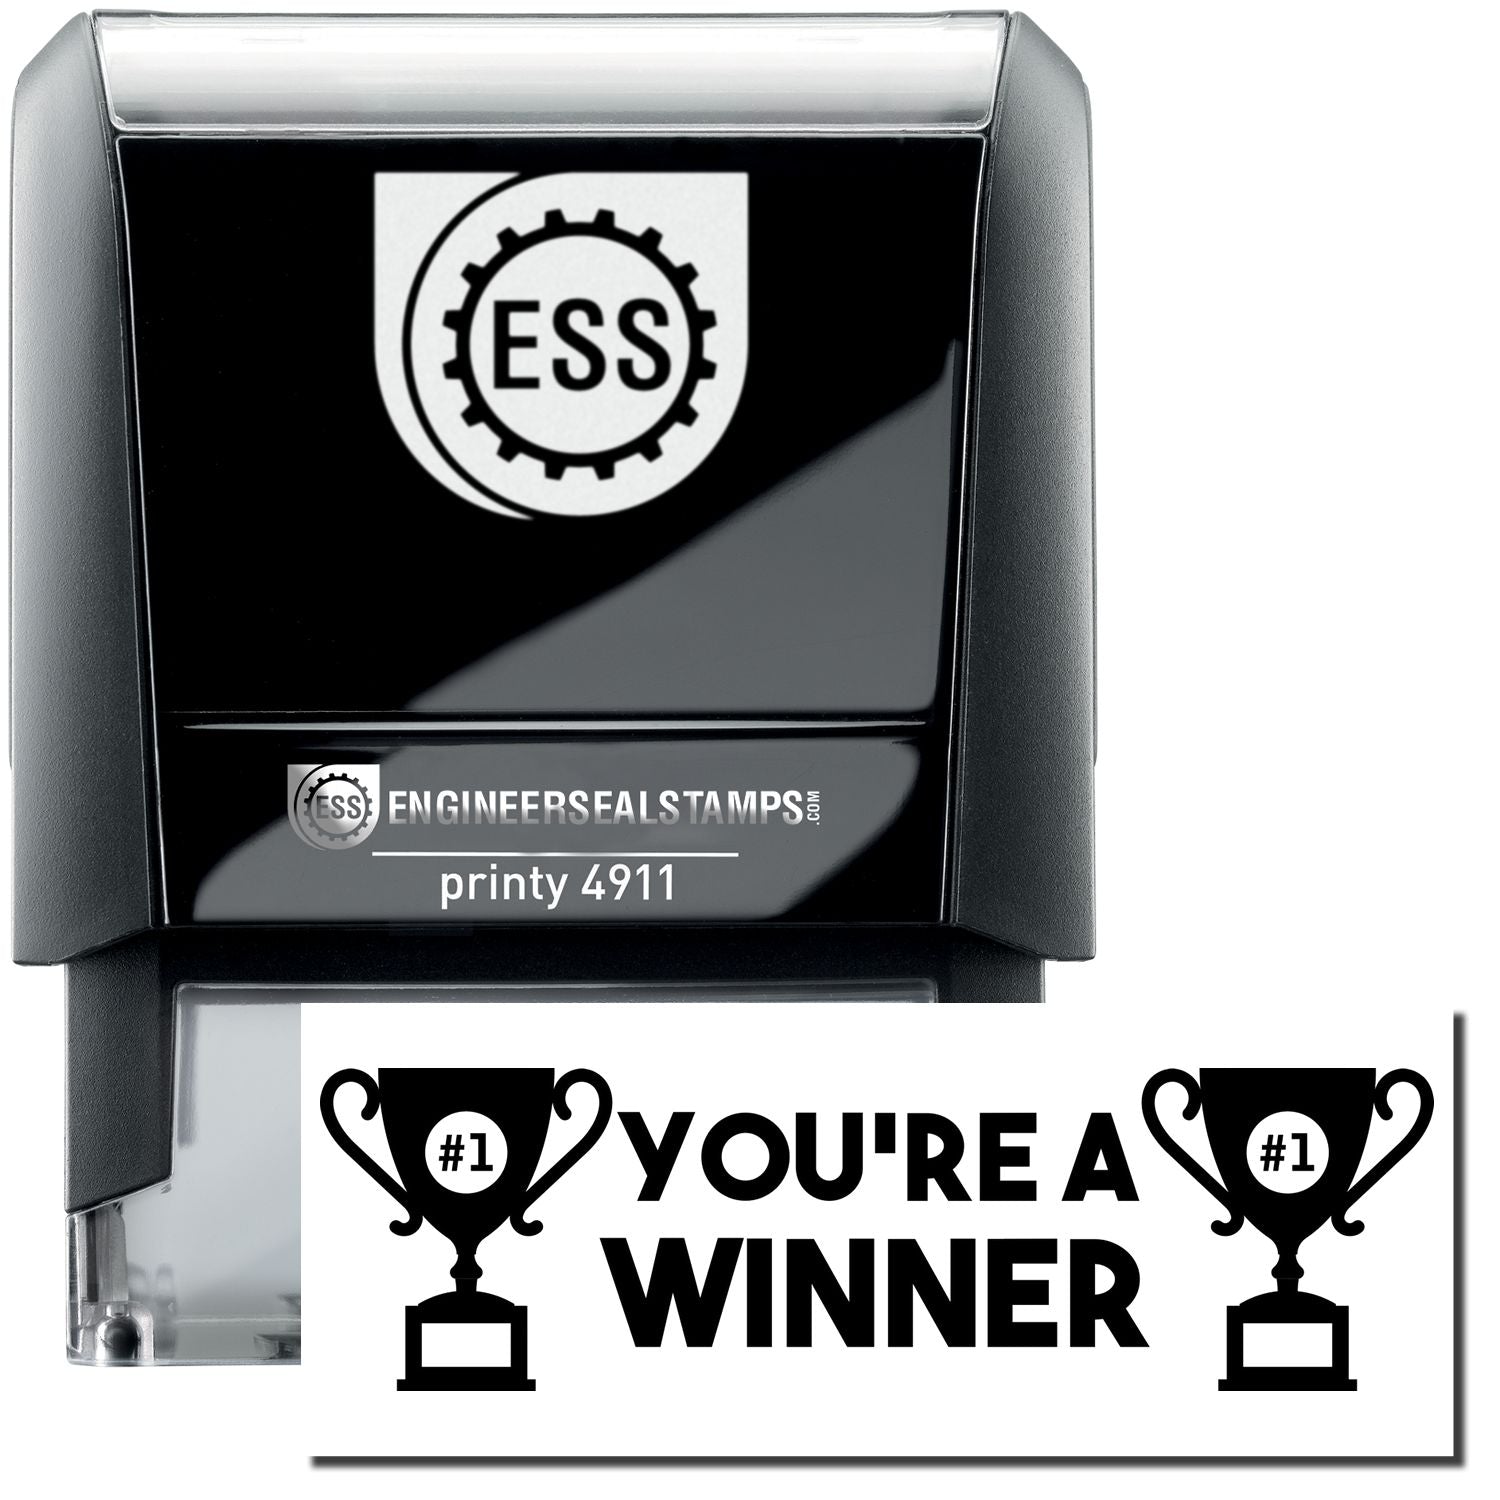 A self-inking stamp with a stamped image showing how the text "YOU'RE A WINNER" (in bold font with images of a trophy with #1 inside on each side) is displayed after stamping.